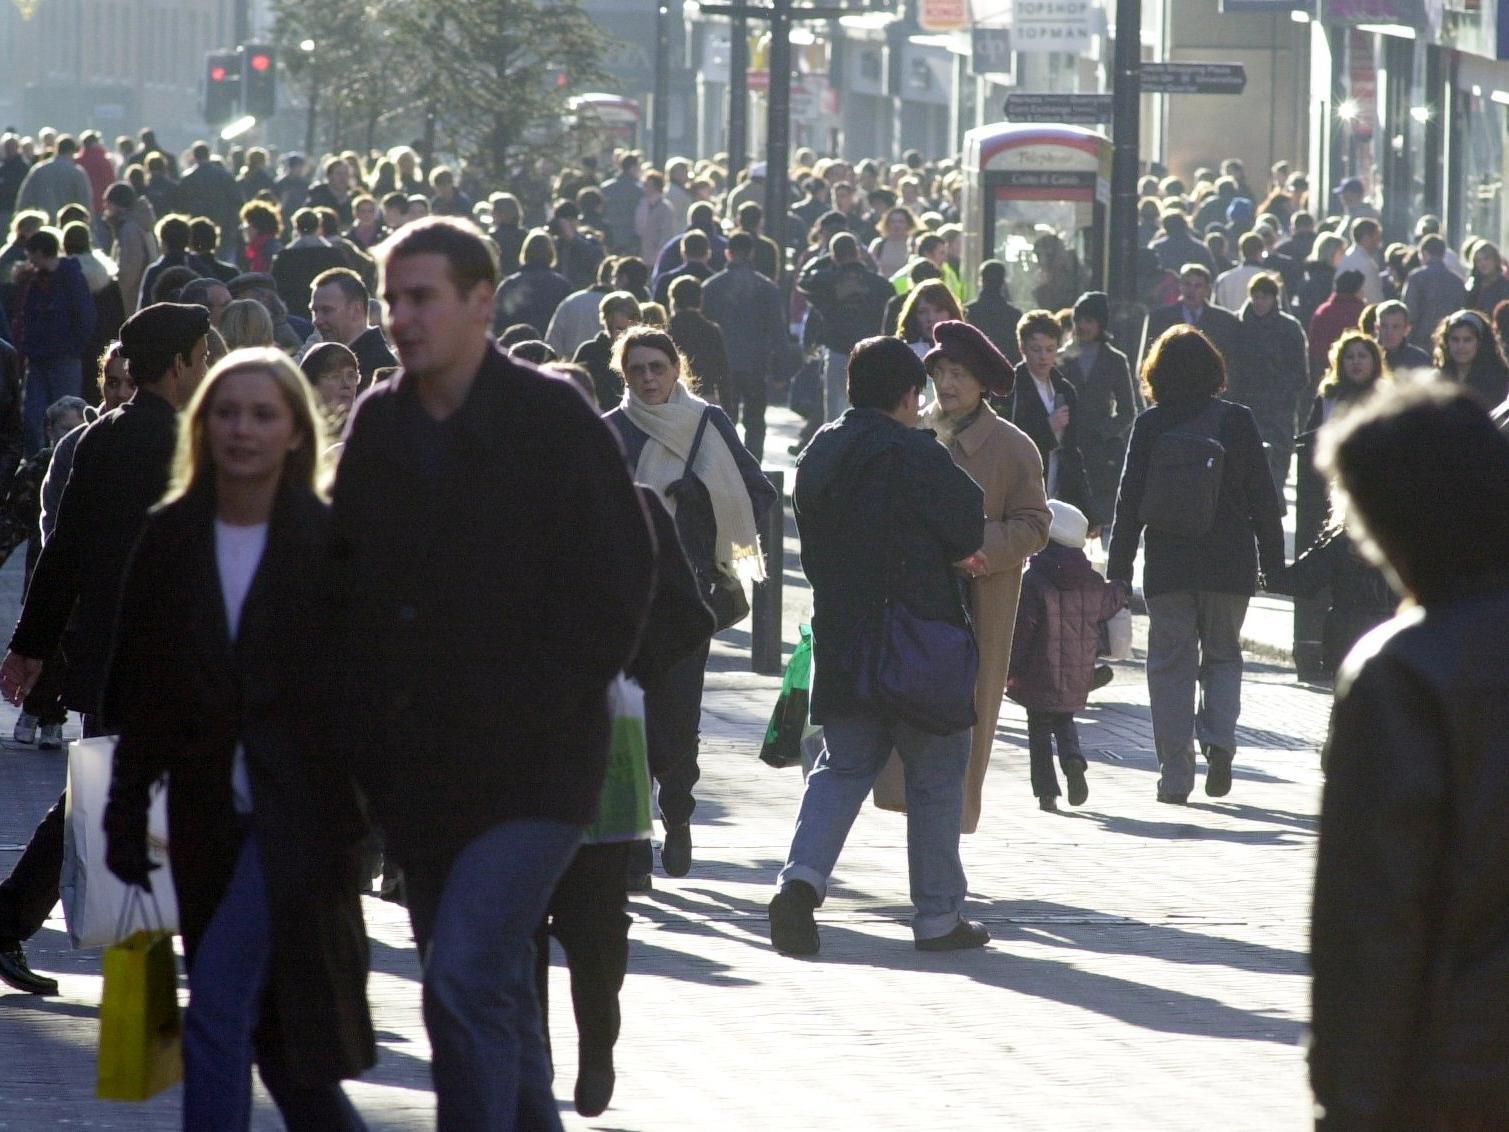 This was the scene on Briggate for the Christmas sales.